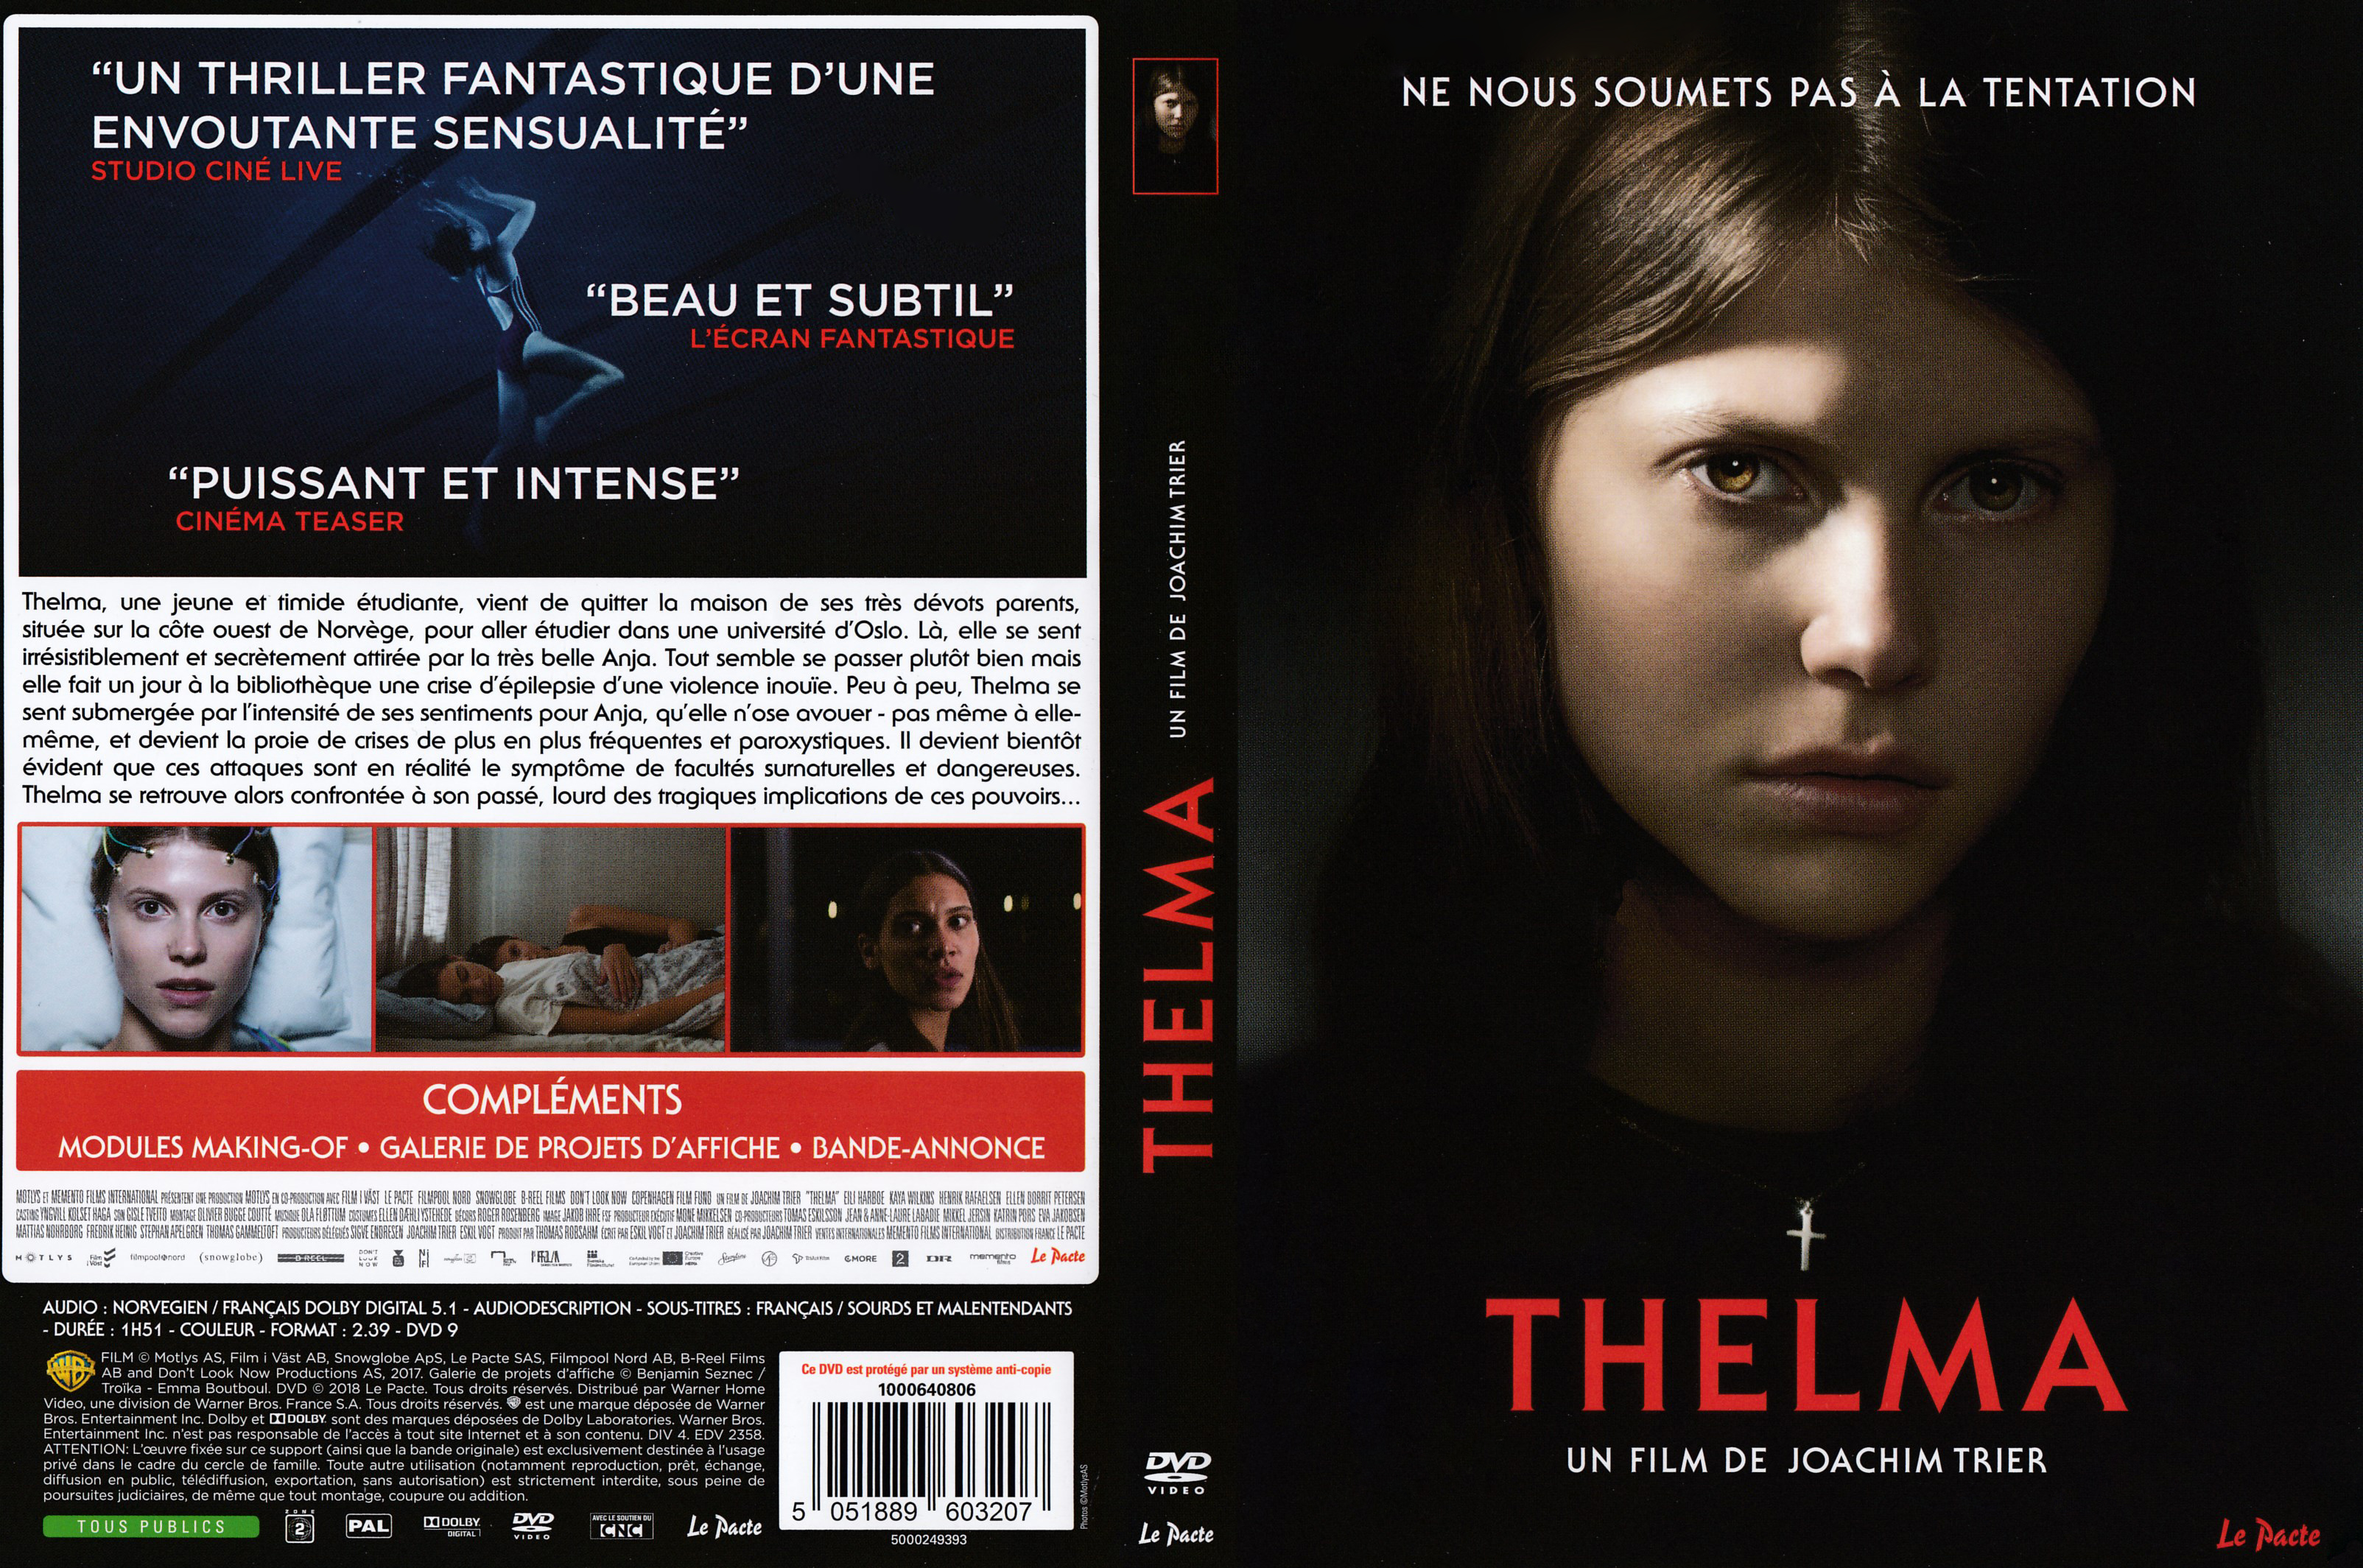 Jaquette DVD Thelma